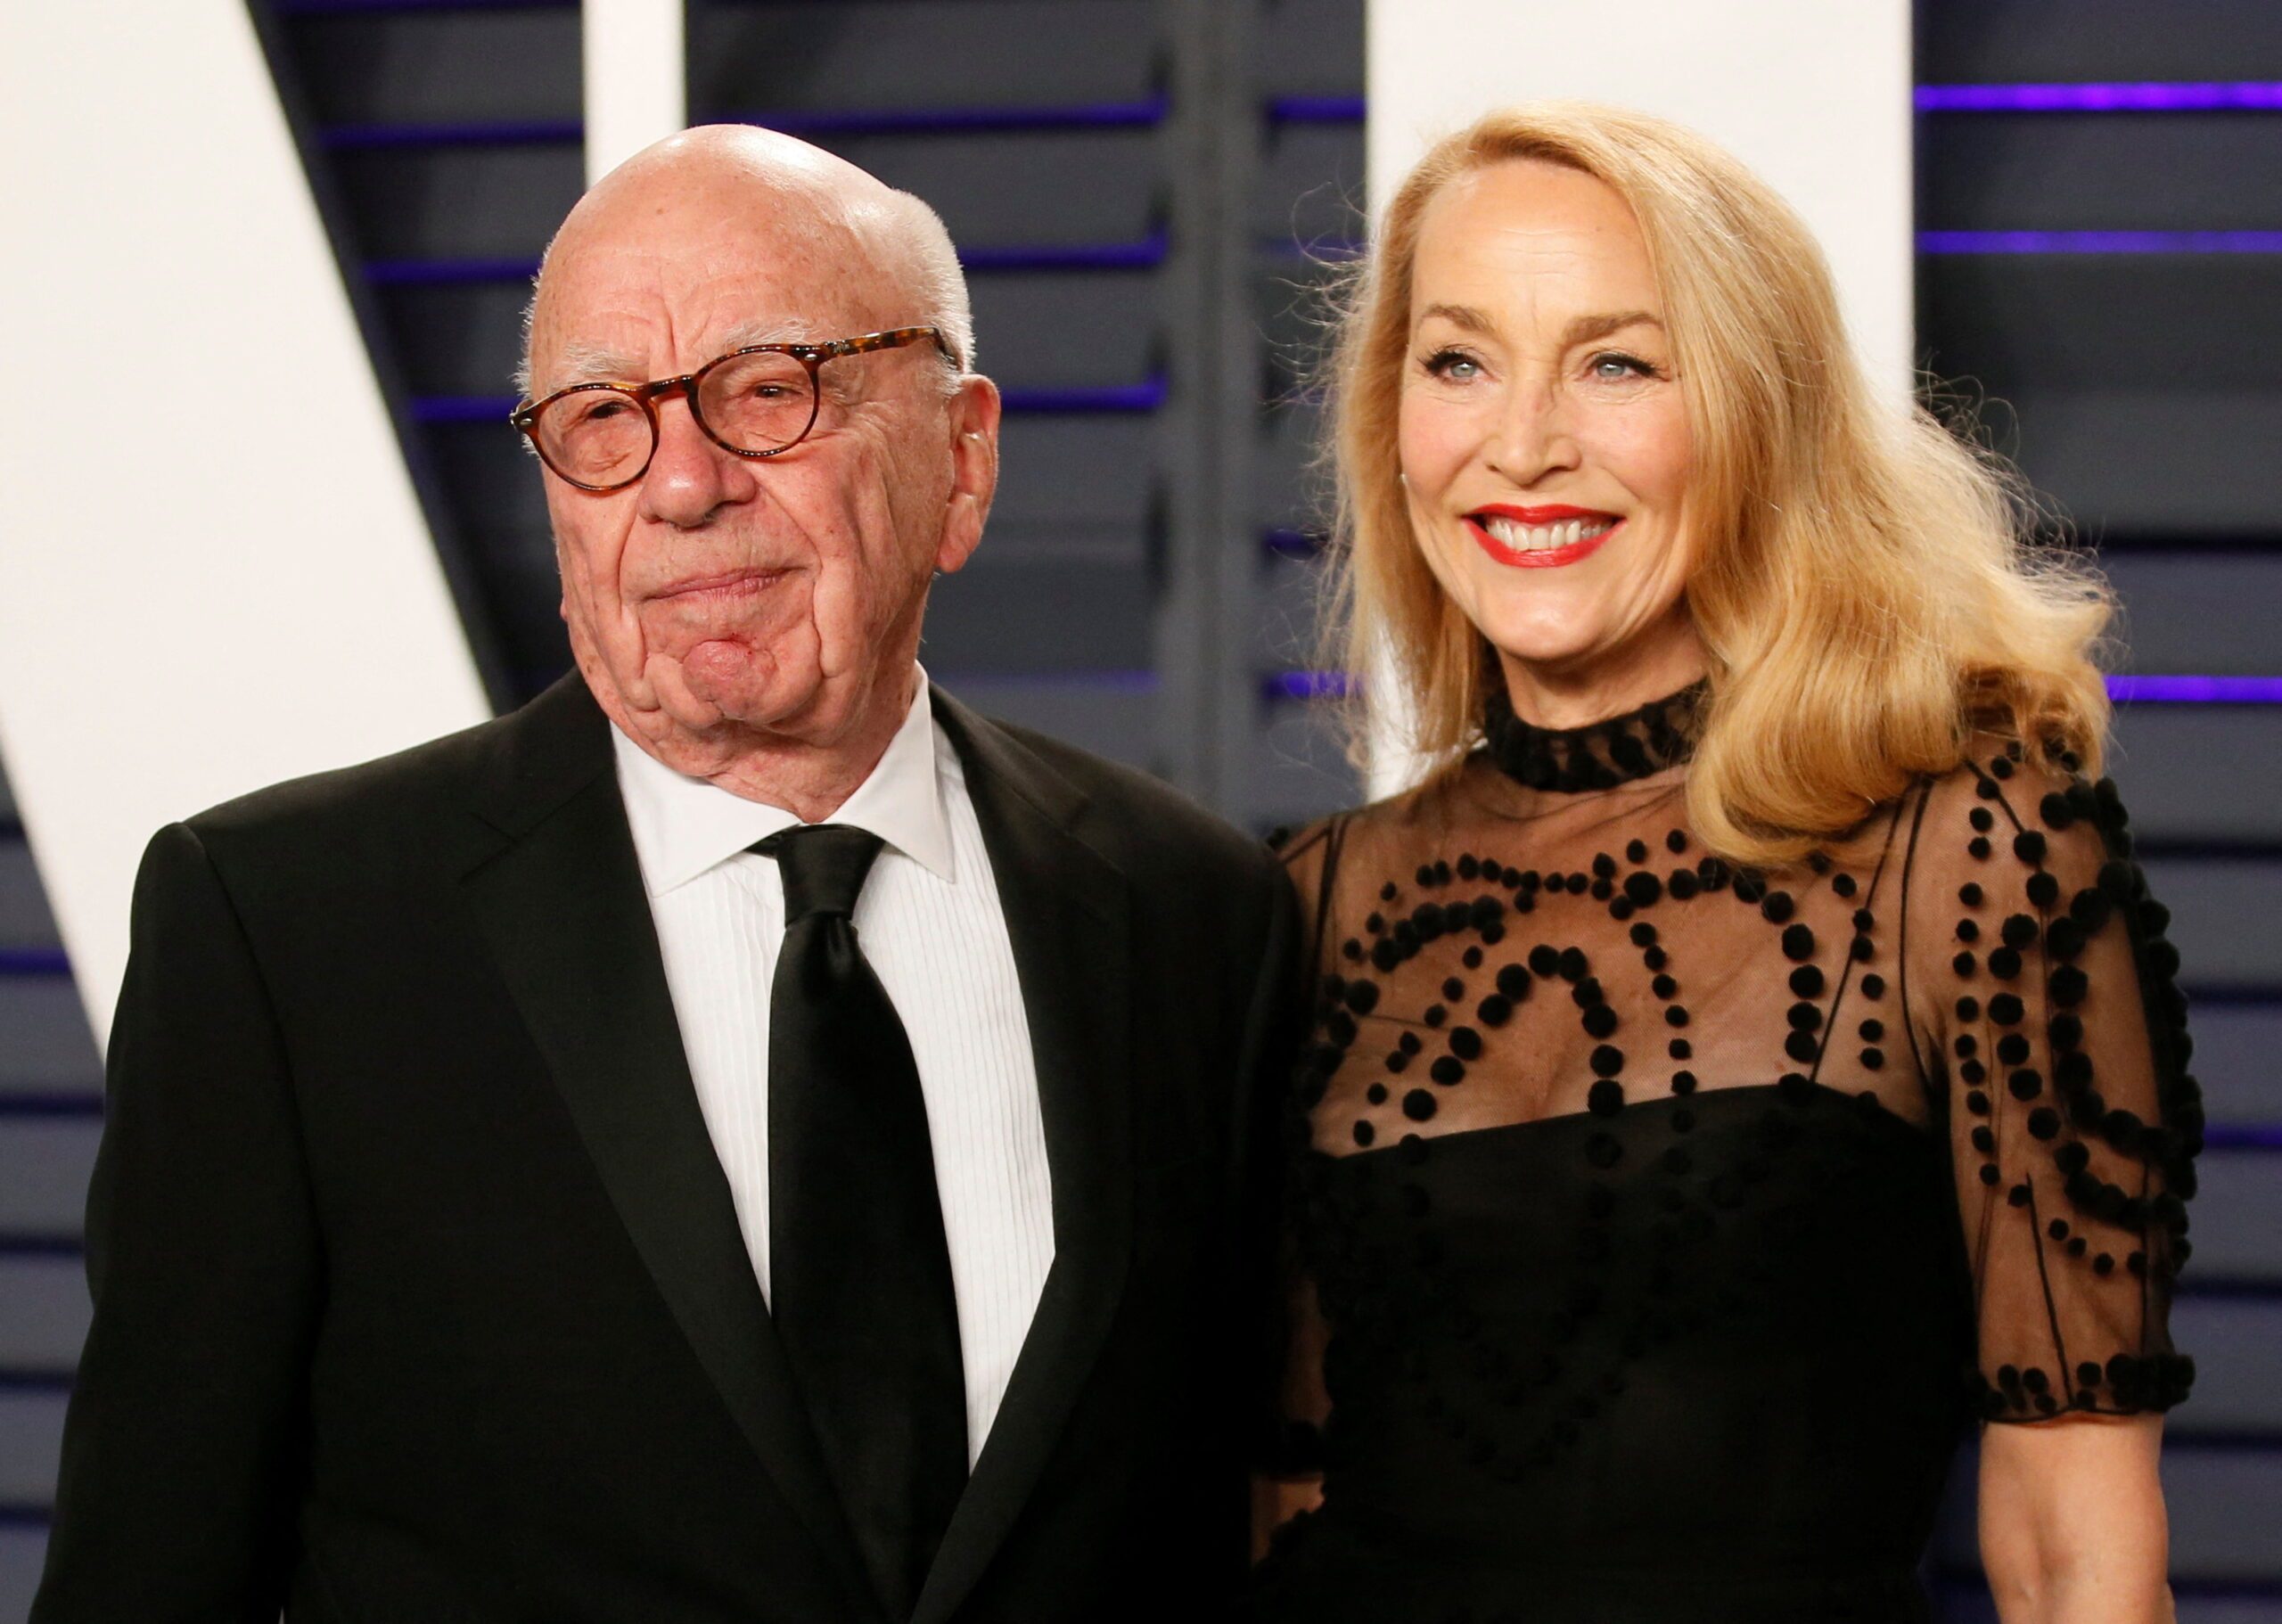 Rupert Murdoch and Jerry Hall are getting a divorce – reports